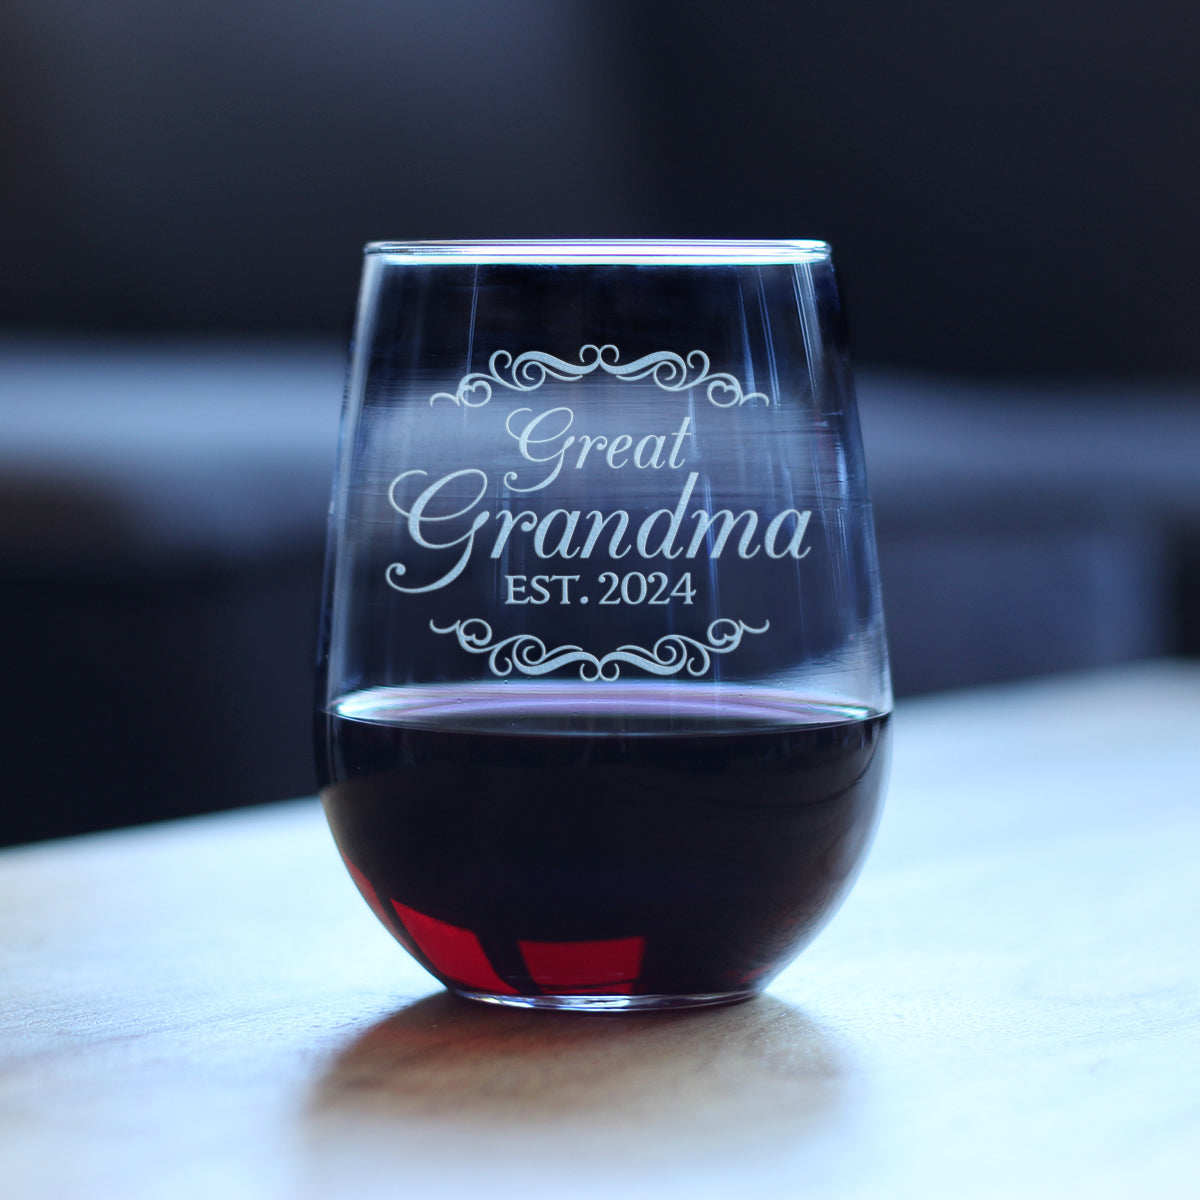 Great Grandma Est 2024 - New Great Grandmother Stemless Wine Glass Gift for First Time Great Grandparents - Decorative 17 Oz Large Glasses